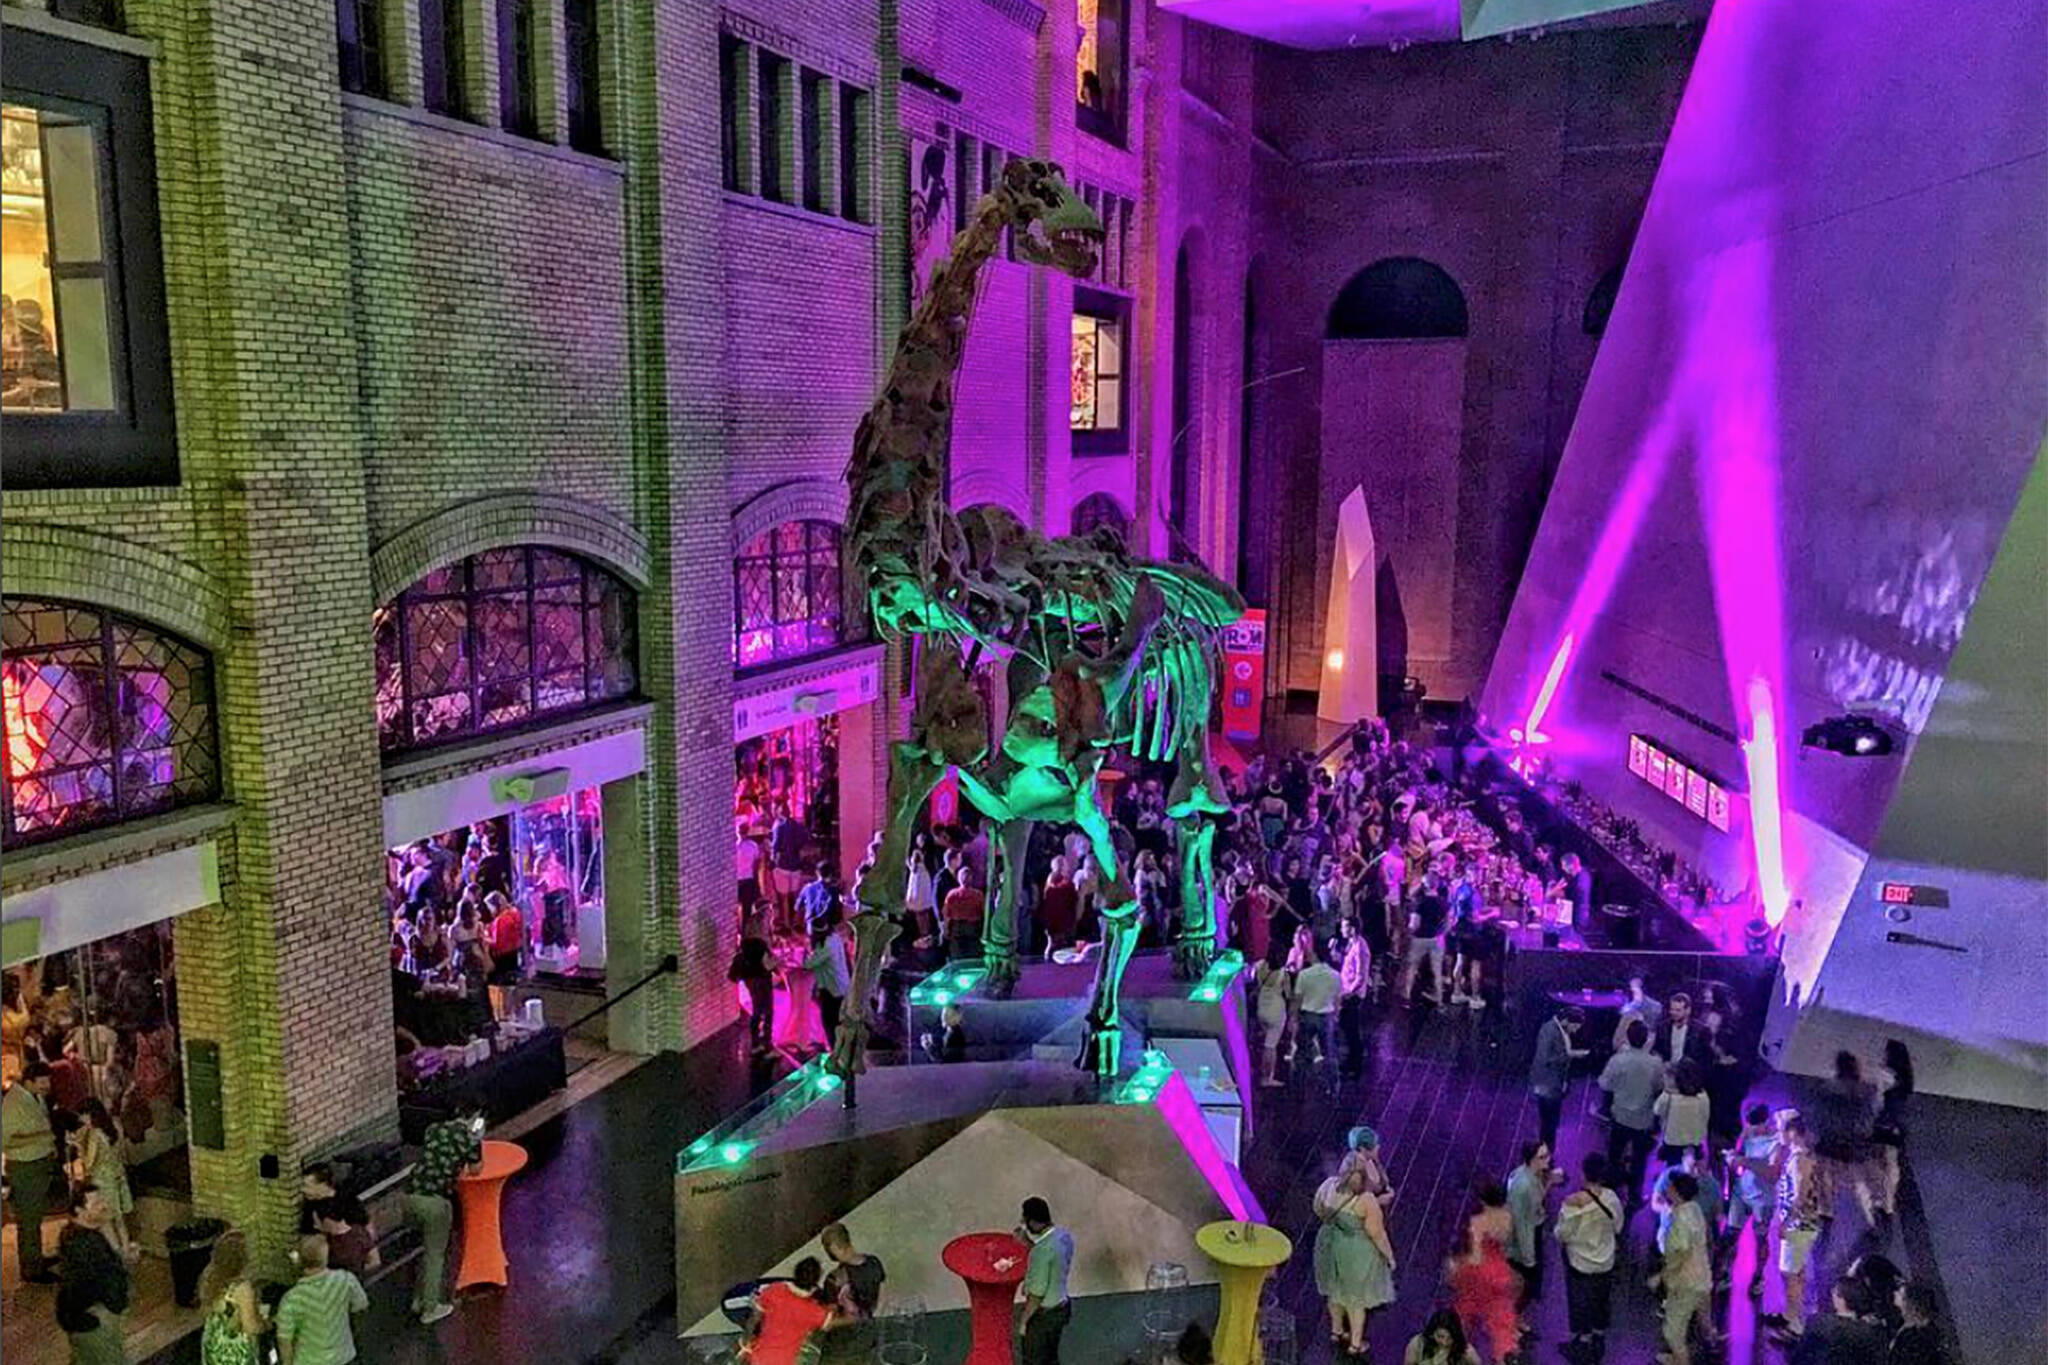 In and Around Toronto: Friday Night Live @ the ROM